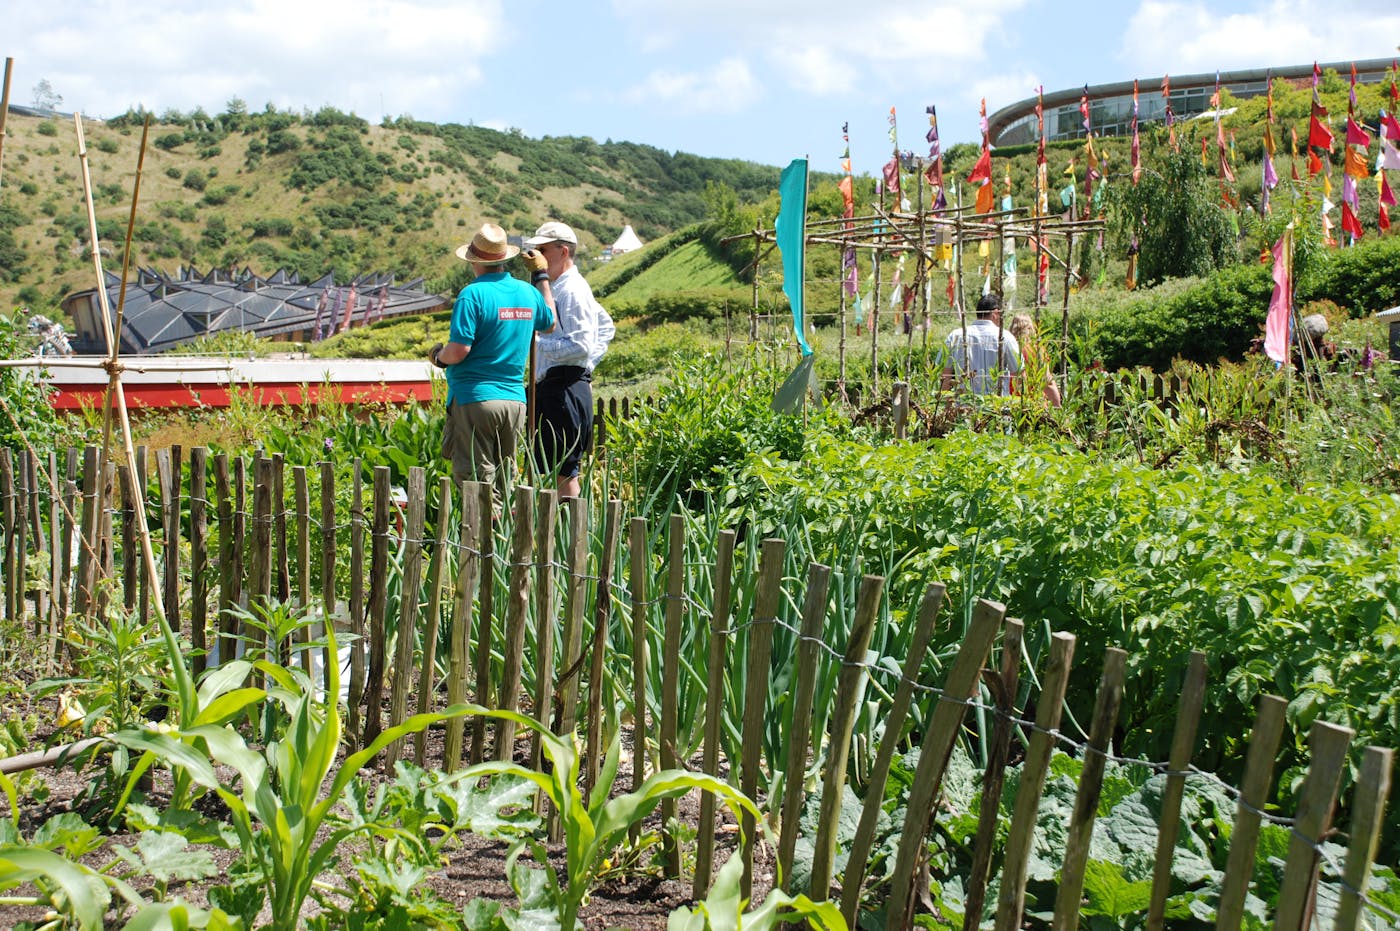 People exploring the sensory garden at The Eden Project